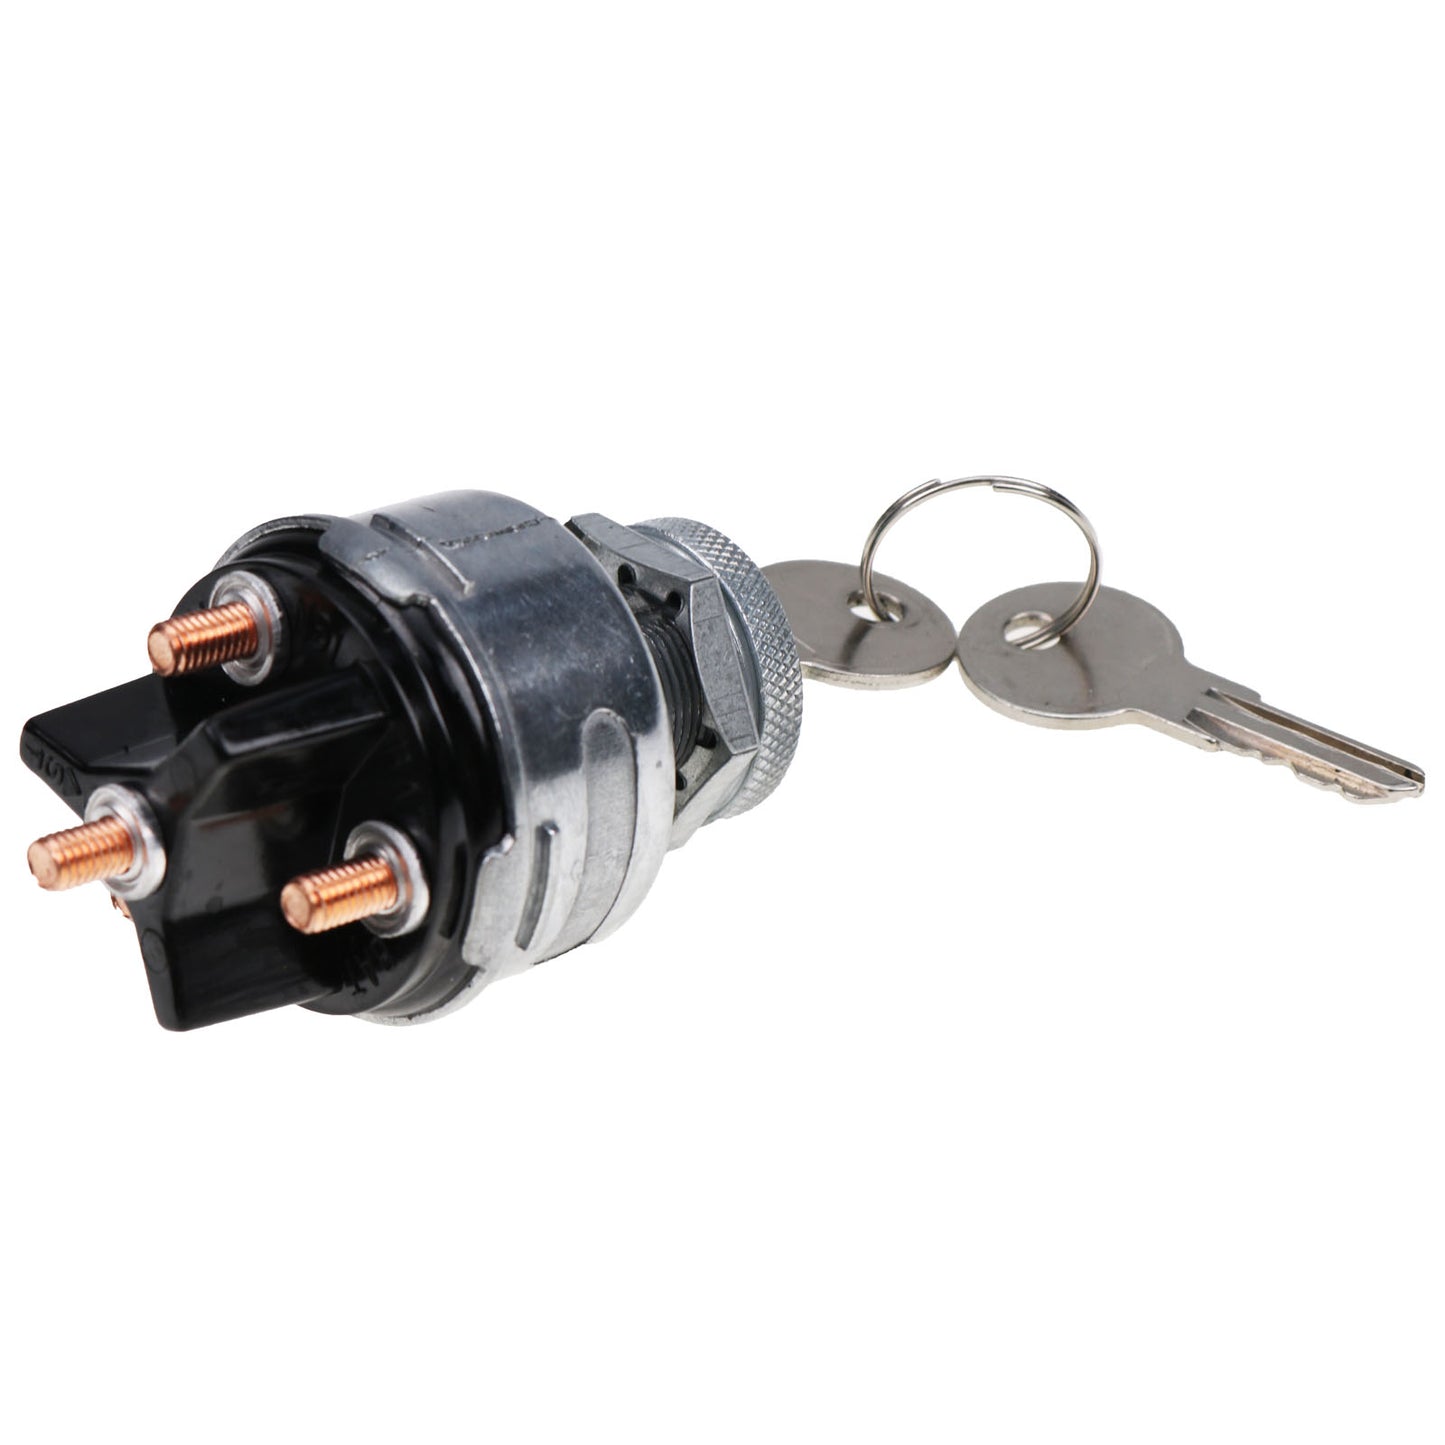 New 641833 Ignition Switch Compatible with New Holland LS160 LS170 LS180 LS190 L190 LS150 LS140 L150 L160 L170 L180 L175 L785 L865 L783 L185 L565 LX485 LX565 LX665 LX885 LX865 C185 C190 C175